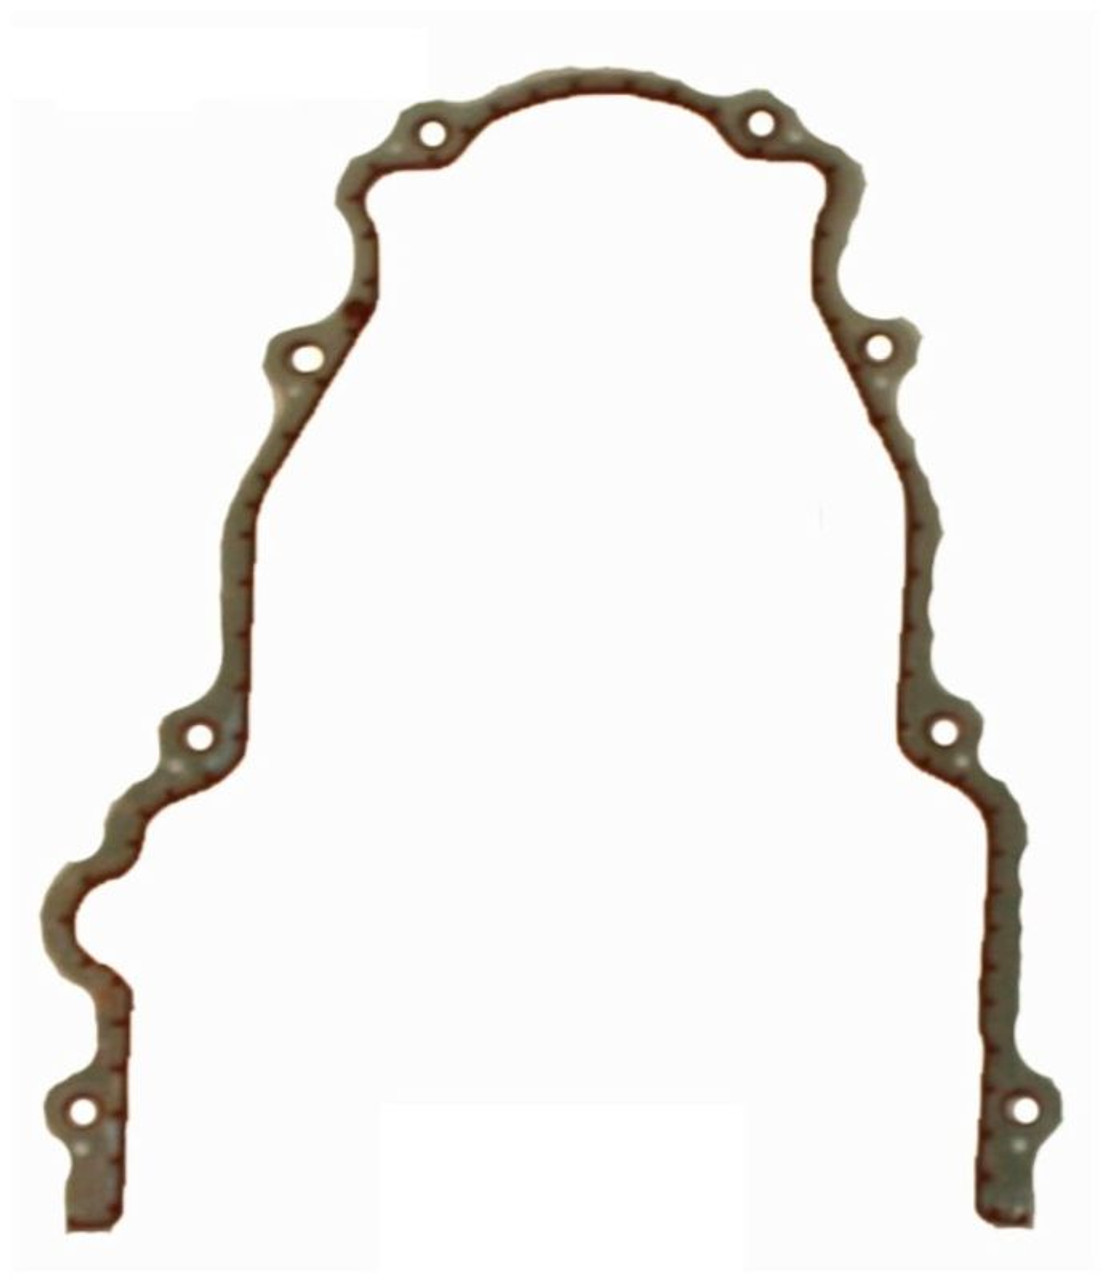 2010 Cadillac Escalade 6.2L Engine Timing Cover Gasket TCG293-A -634